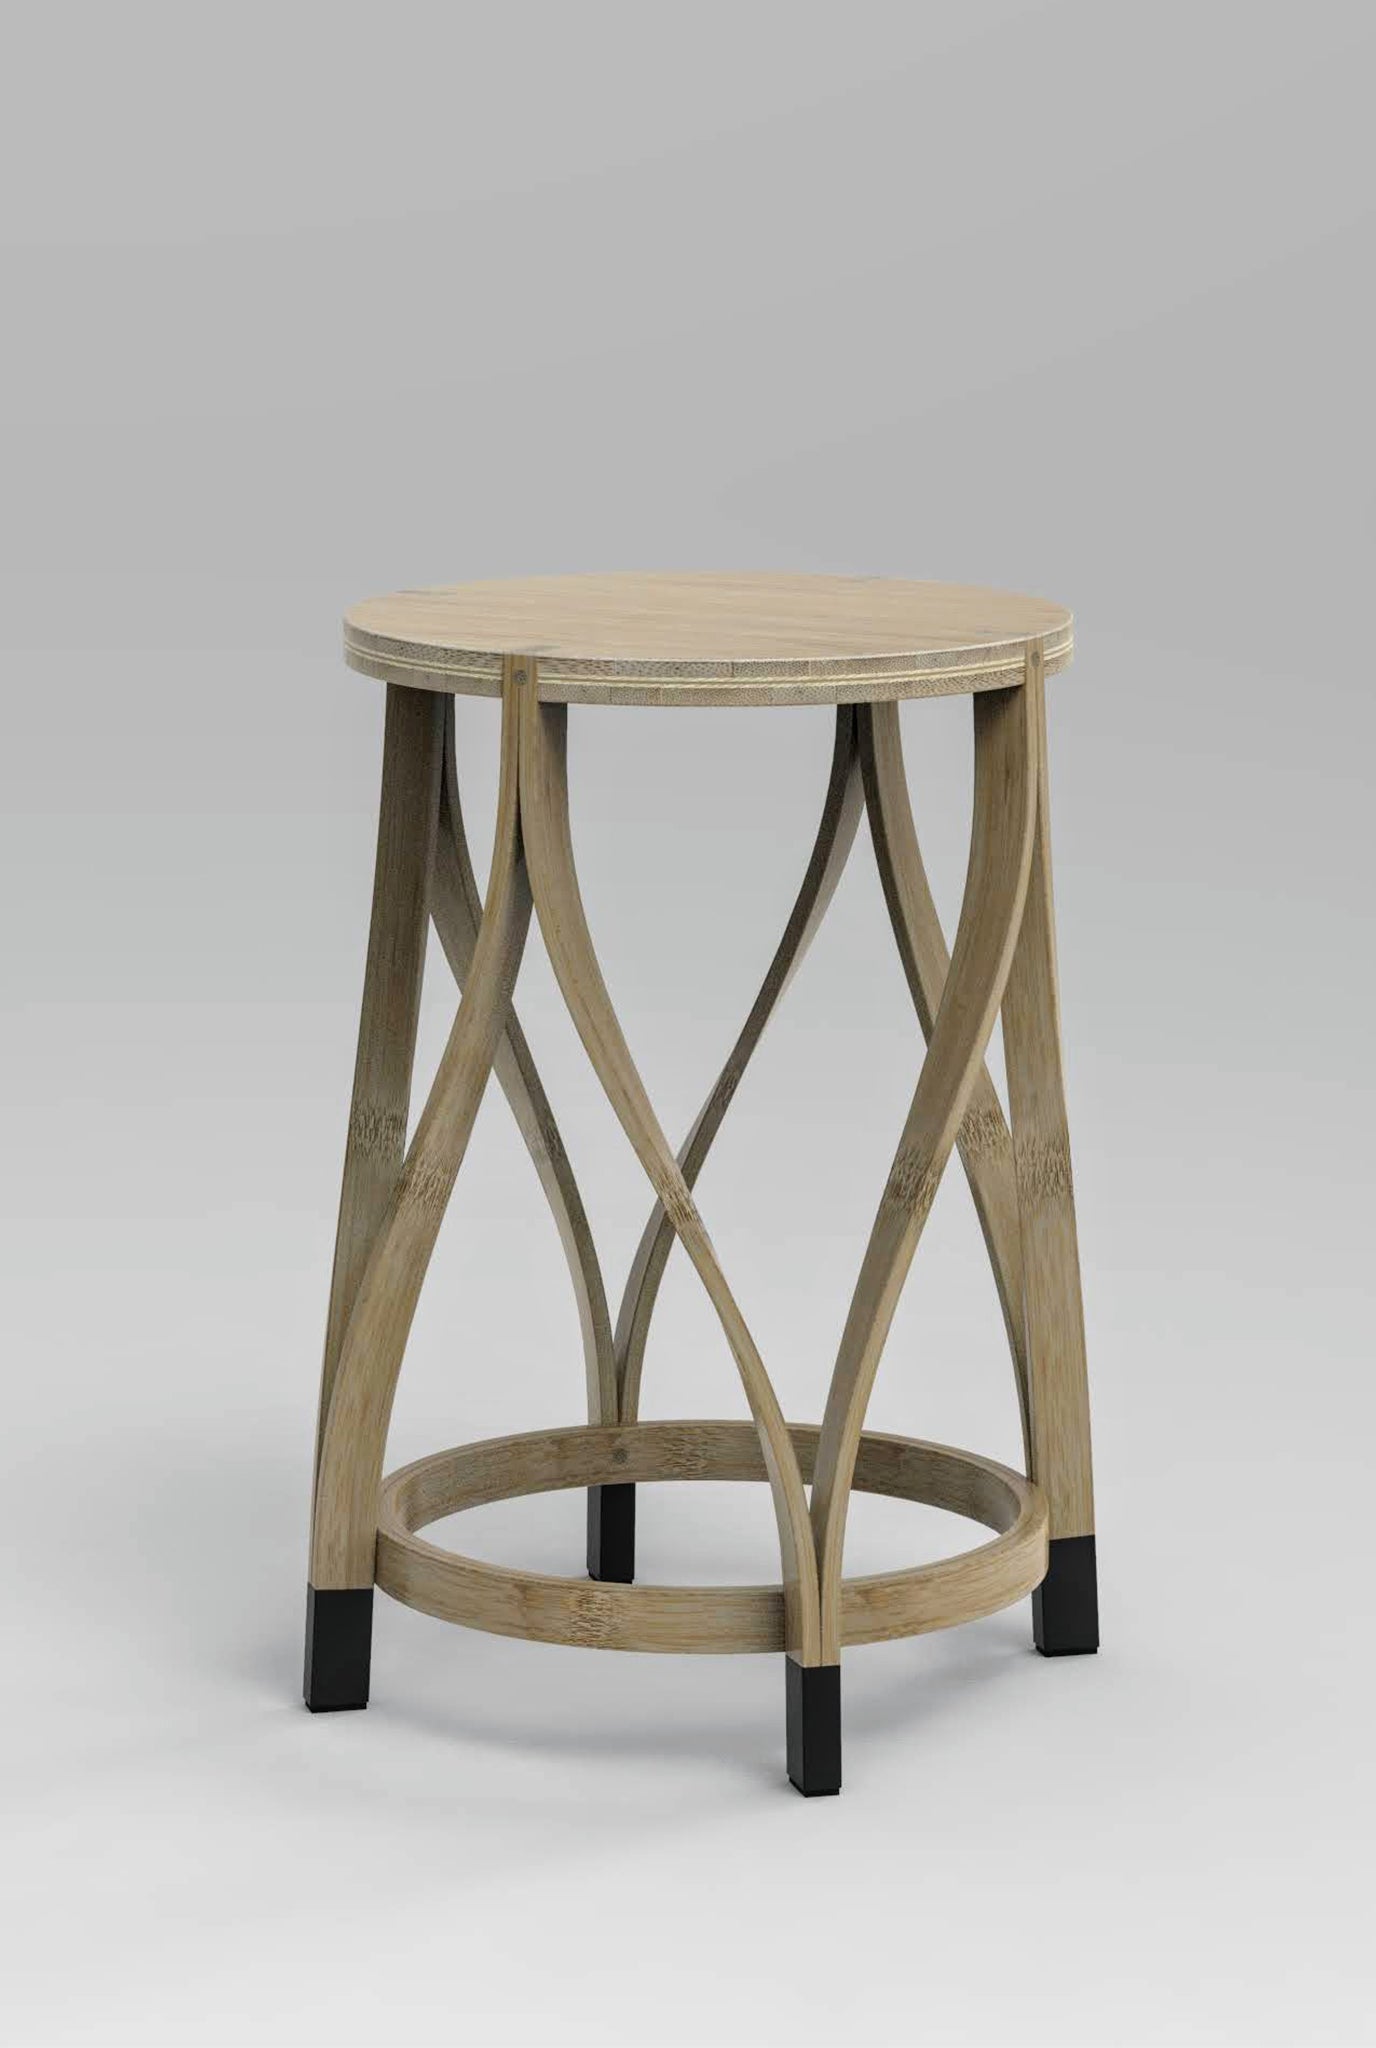 handcrafted-sustainable-bamboo-stool-side table-jodi